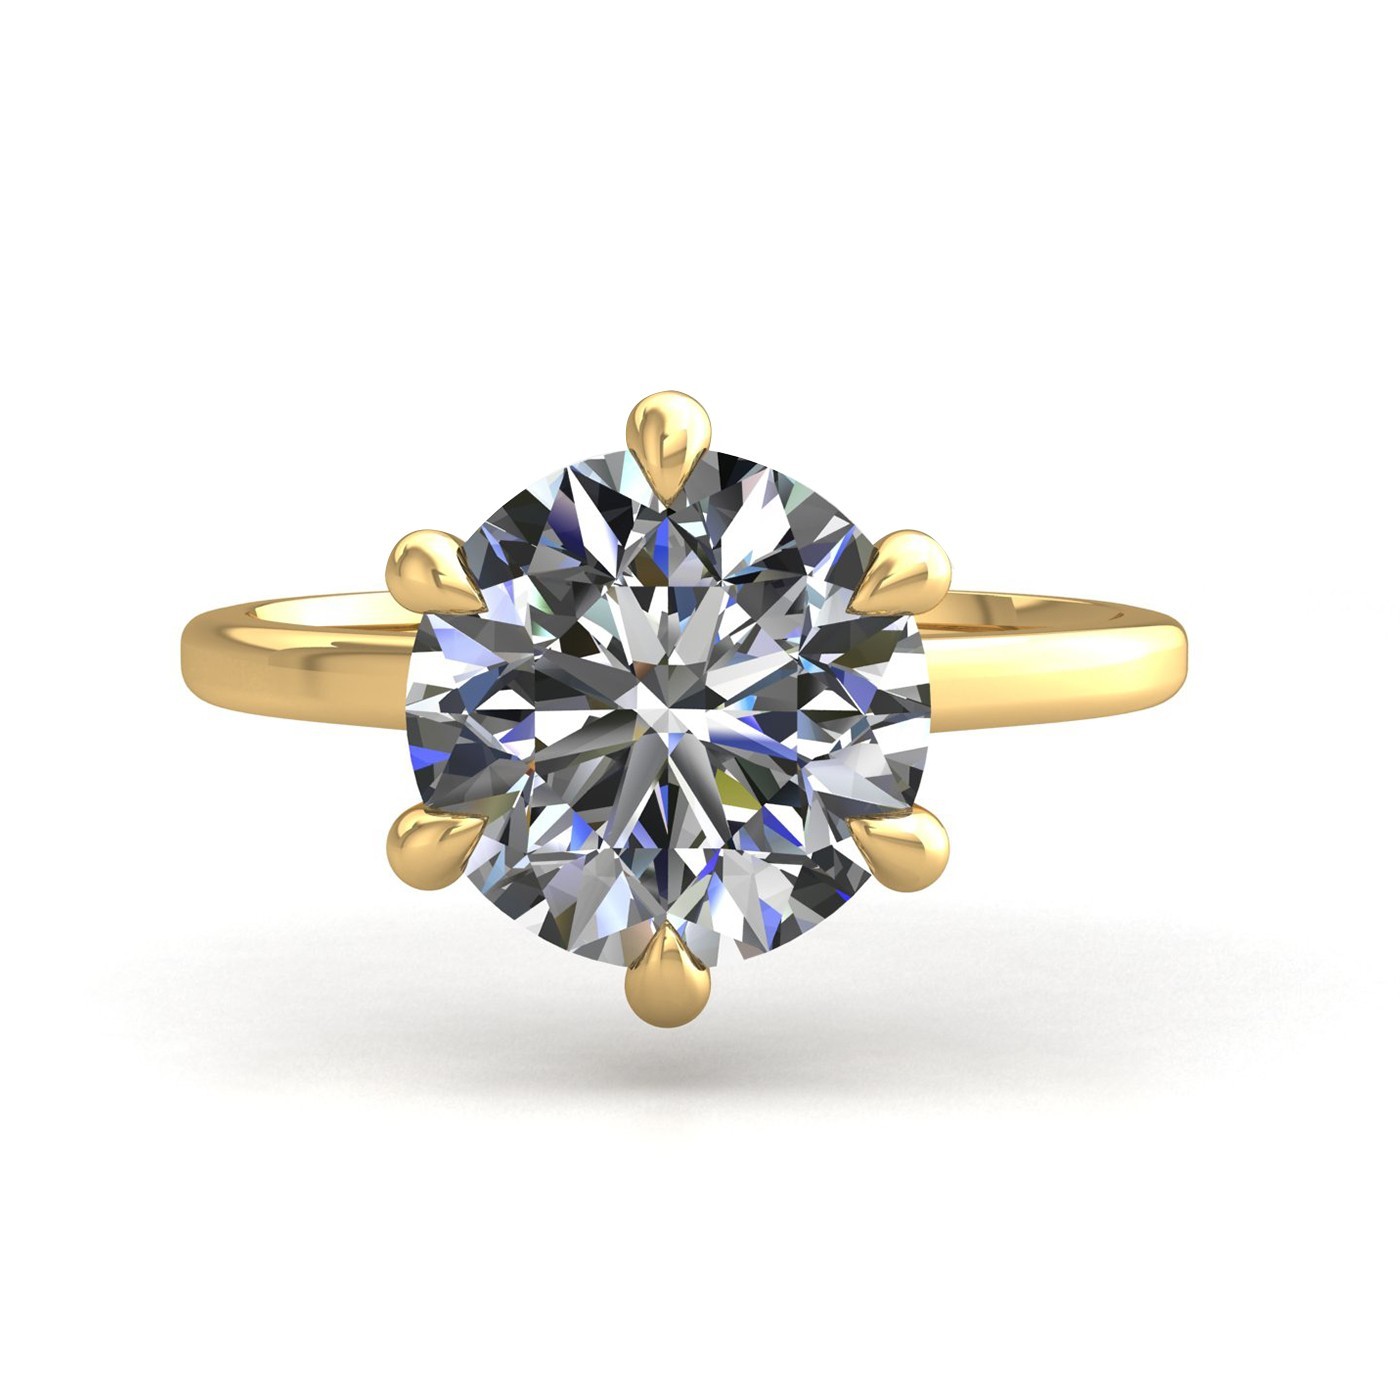 18k yellow gold 1,50 ct 6 prongs solitaire round cut diamond engagement ring with whisper thin band Photos & images